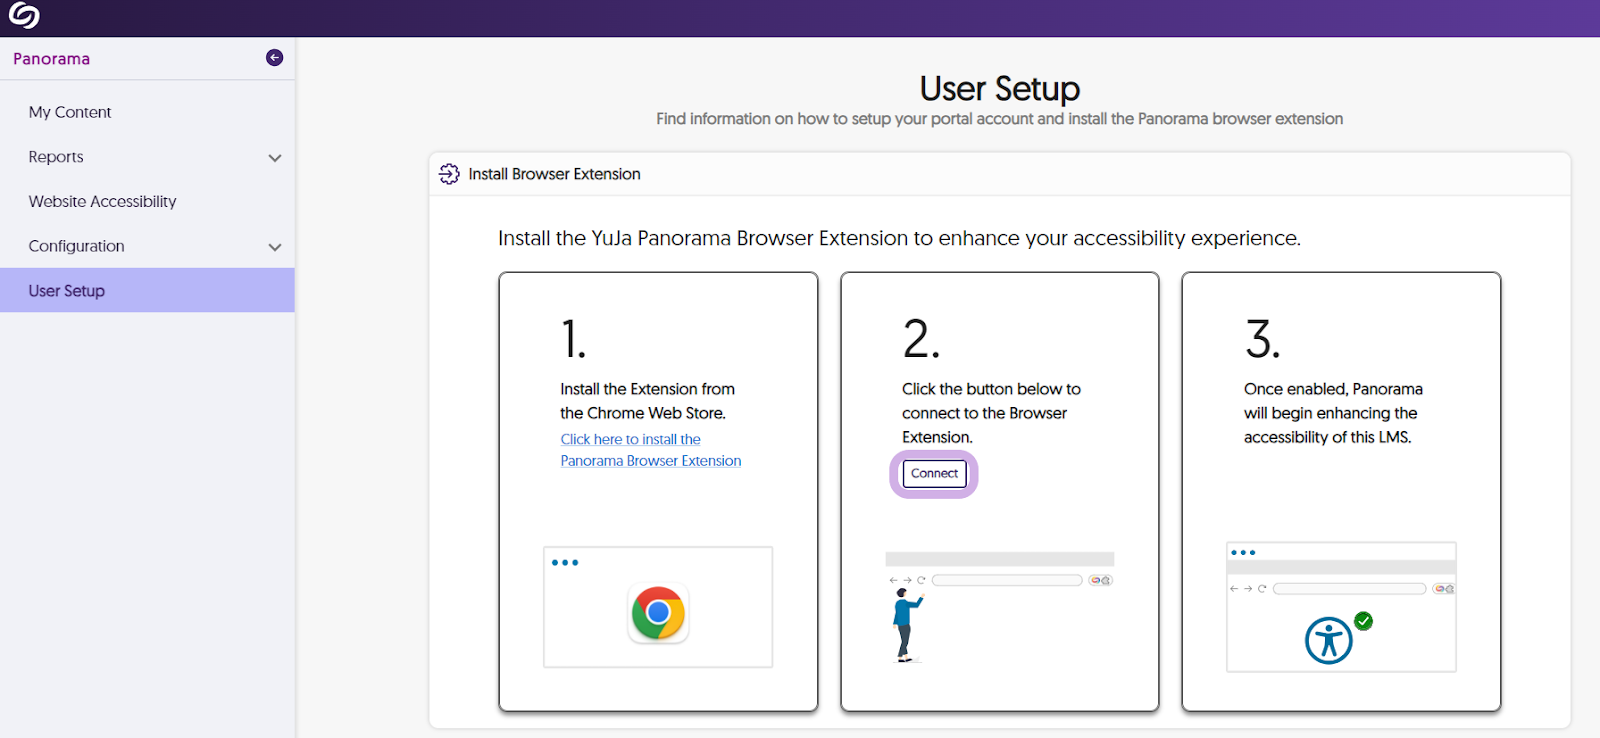 Panorama User Setup page. Step two is highlighted.